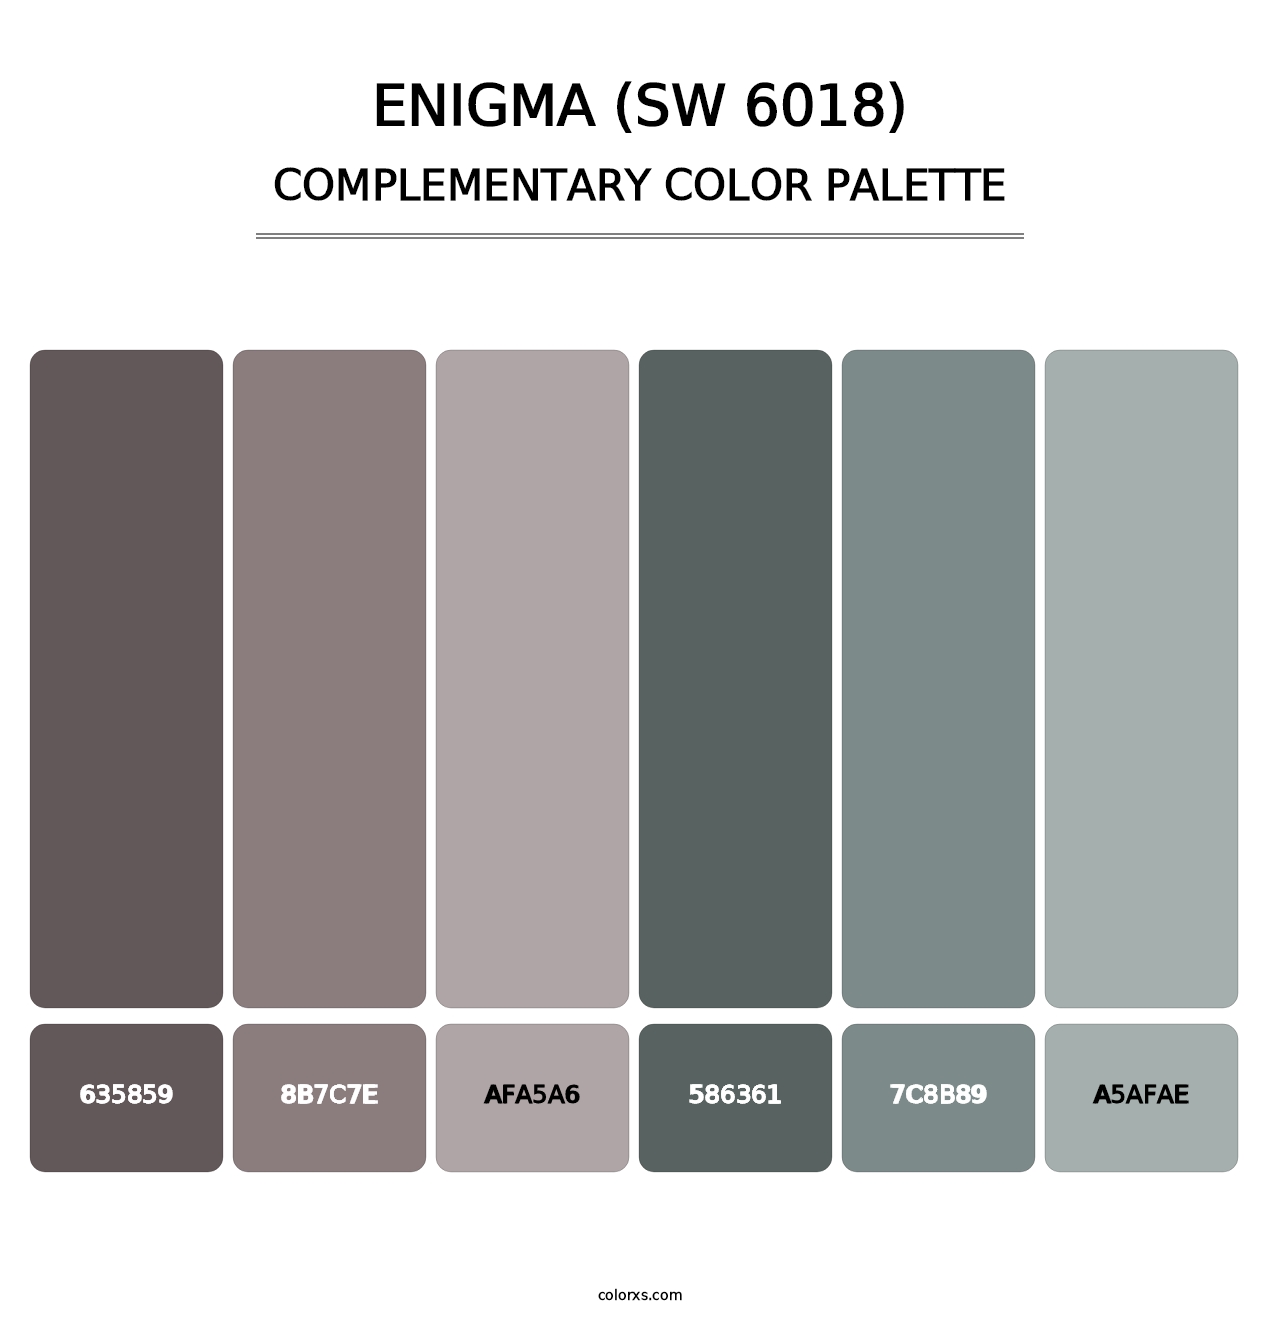 Enigma (SW 6018) - Complementary Color Palette